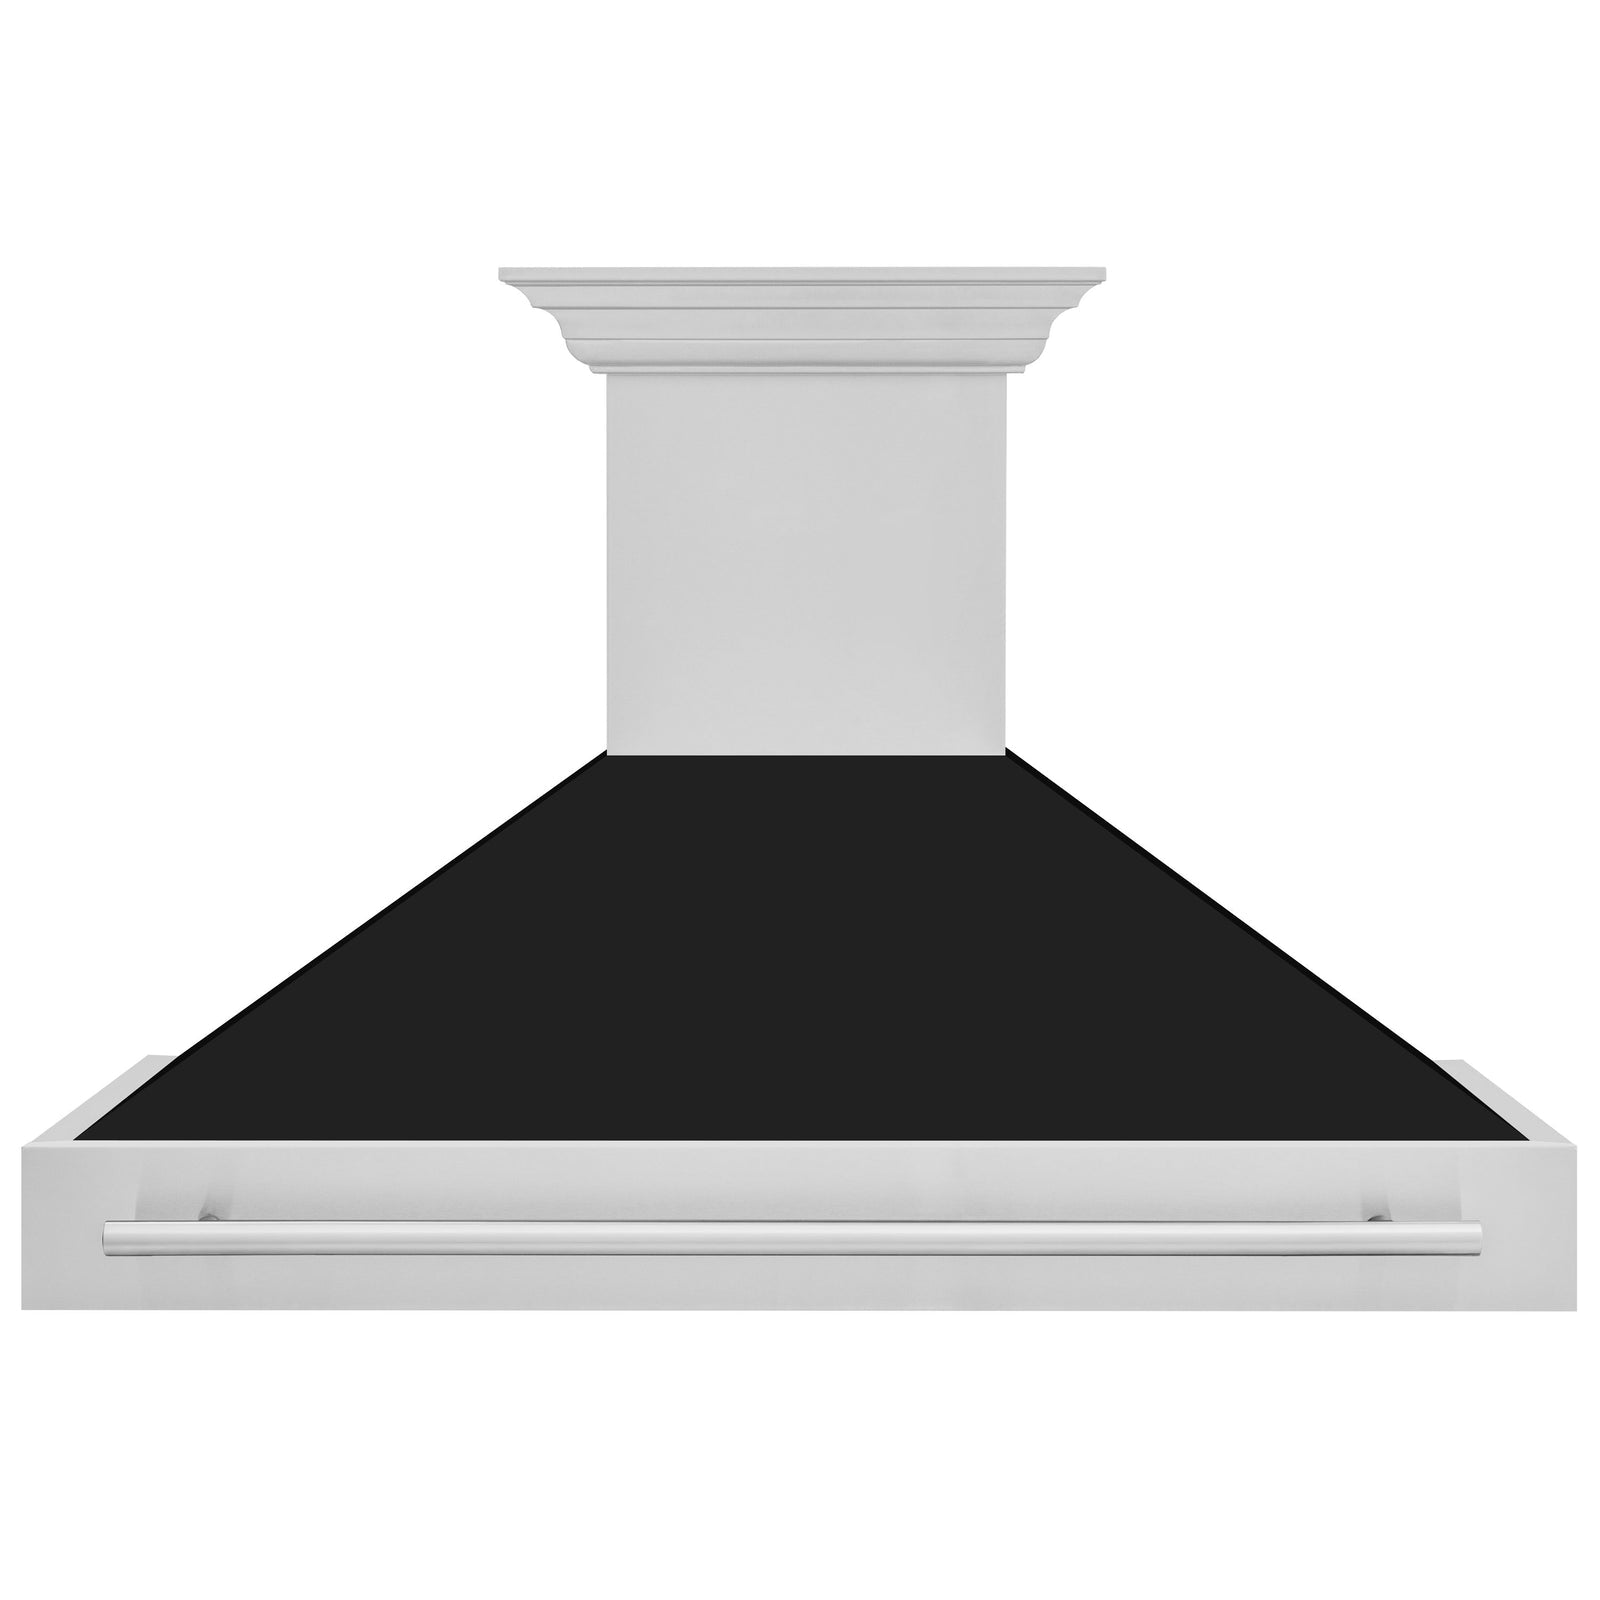 ZLINE 48 In. Stainless Steel Range Hood with Black Matte Shell and Stainless Steel Handle, 8654STX-BLM-48 - Smart Kitchen Lab